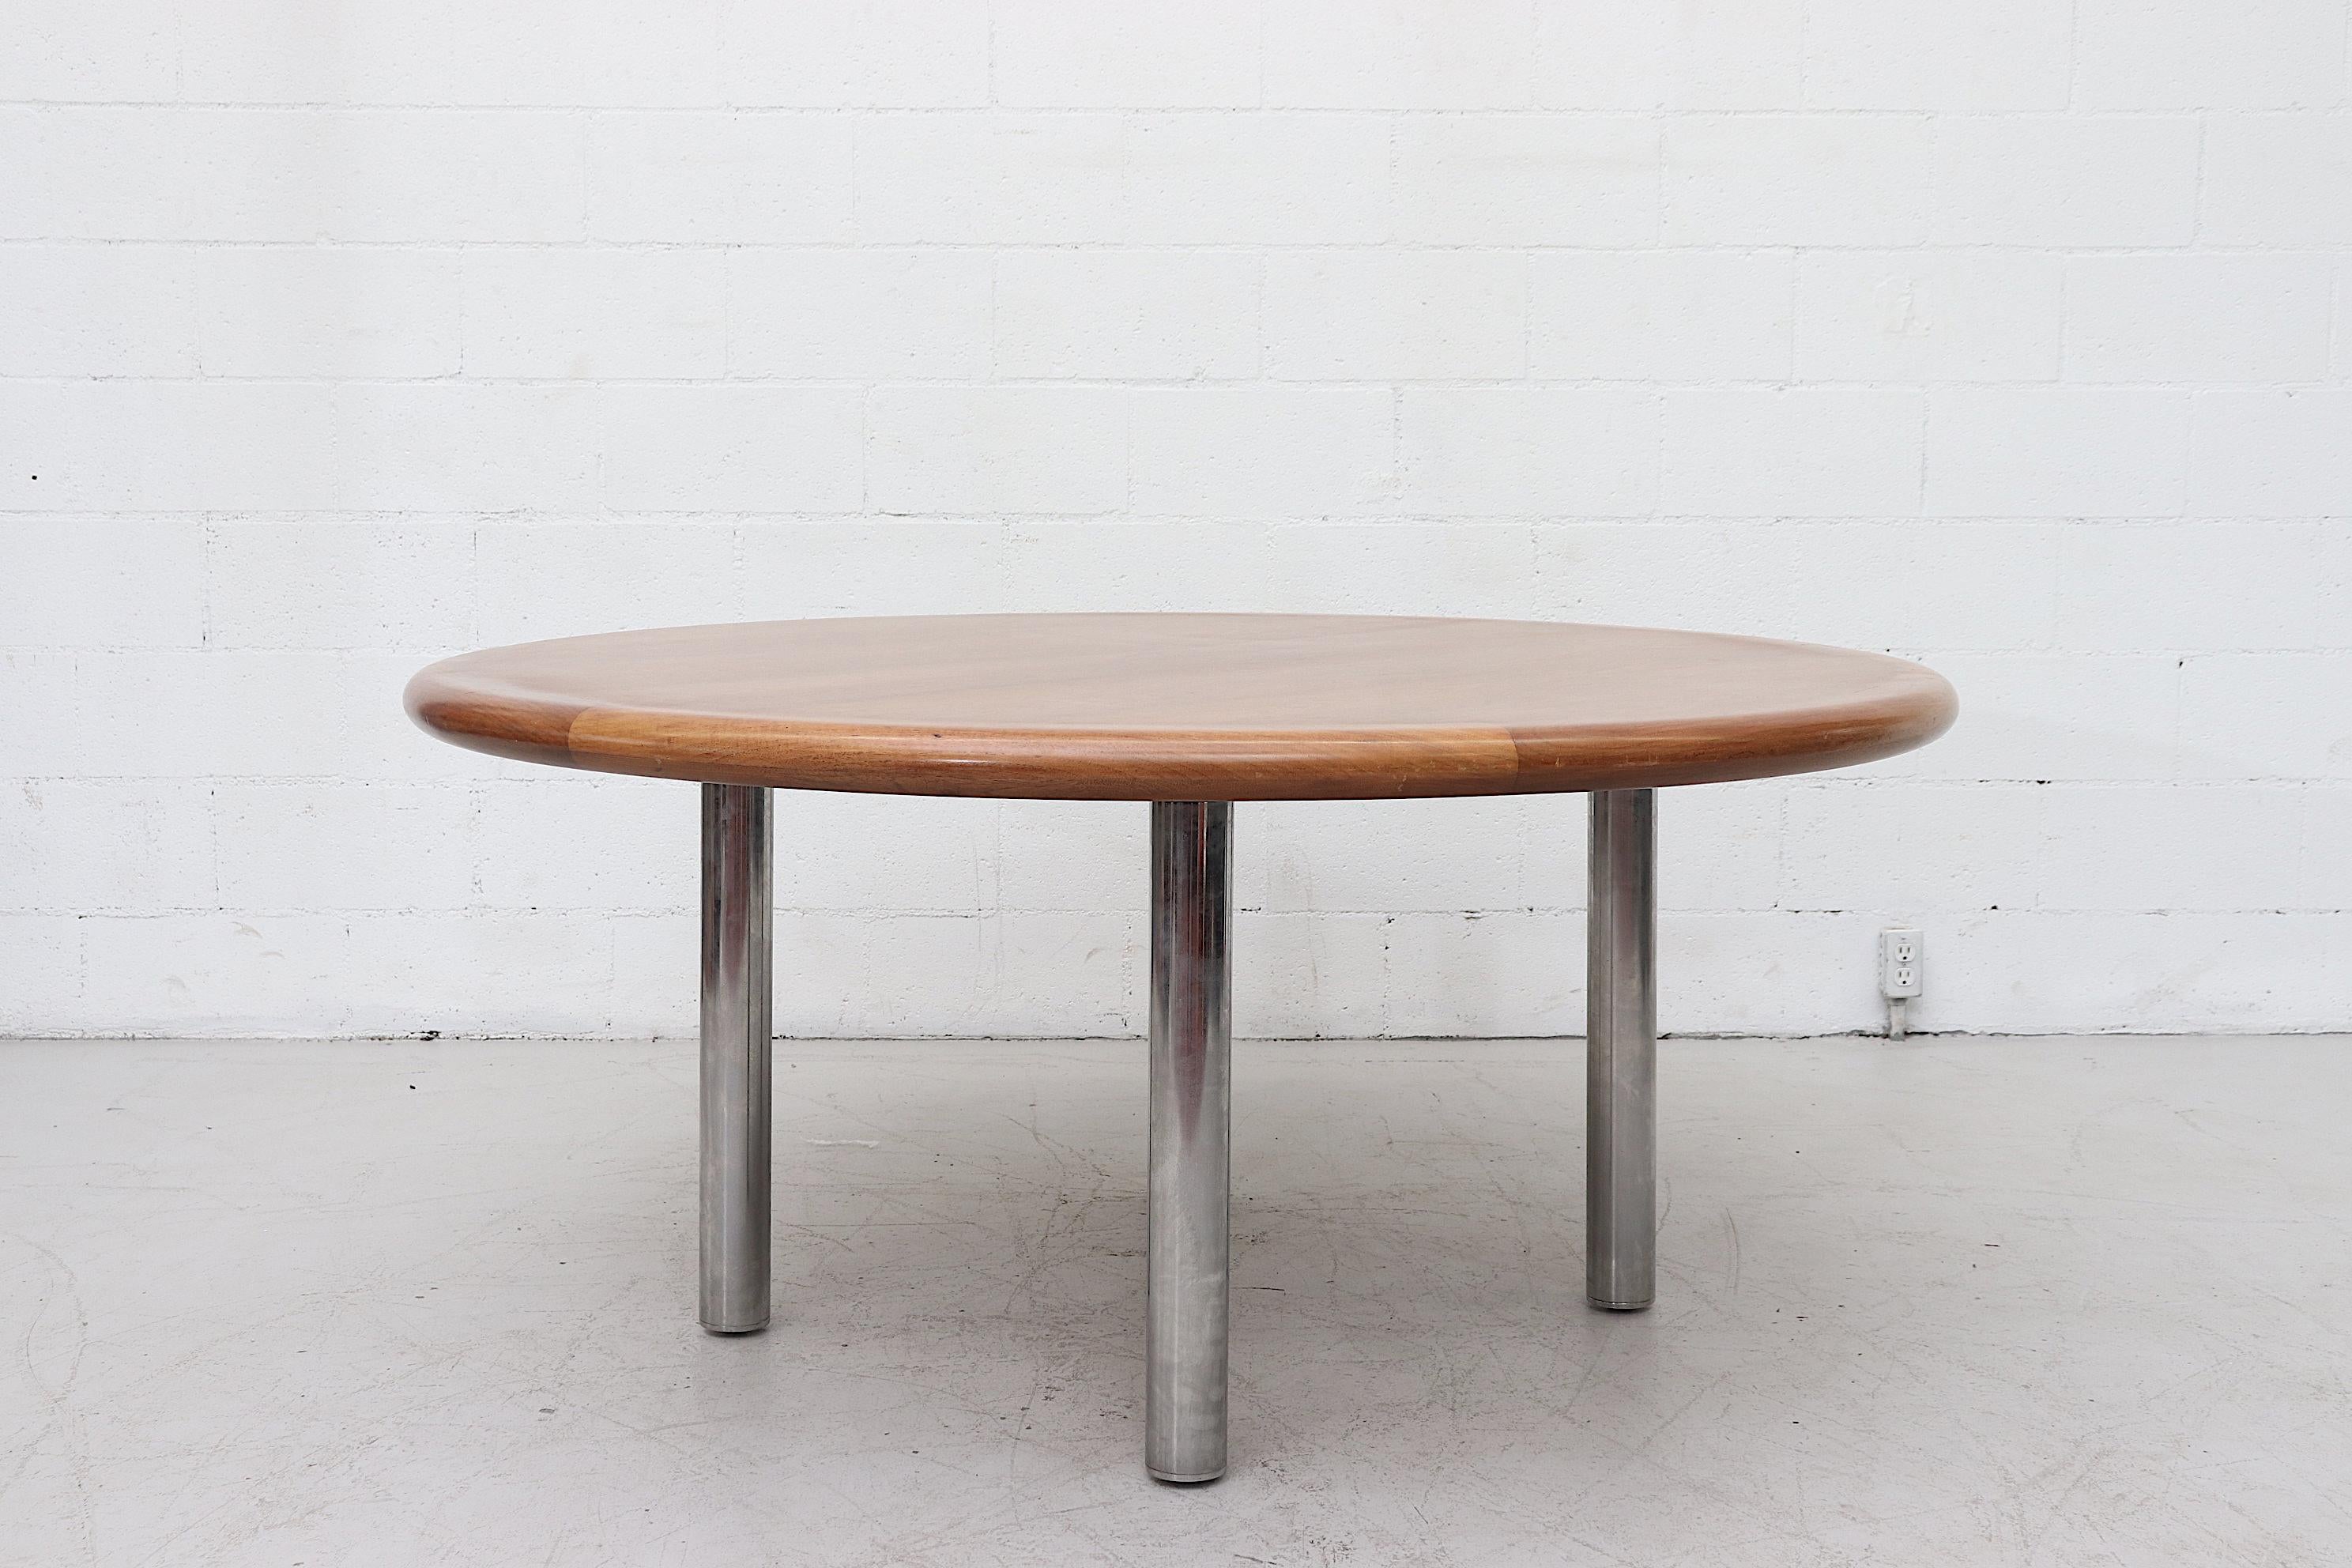 Large 1970s custom dining or conference attributed to Knoll. Extremely heavy bull-nosed solid wood top with fat tubular chrome legs. Custom made conference table for 6 Pollack rolling office chairs in the late 1970s. Previous owner had moved